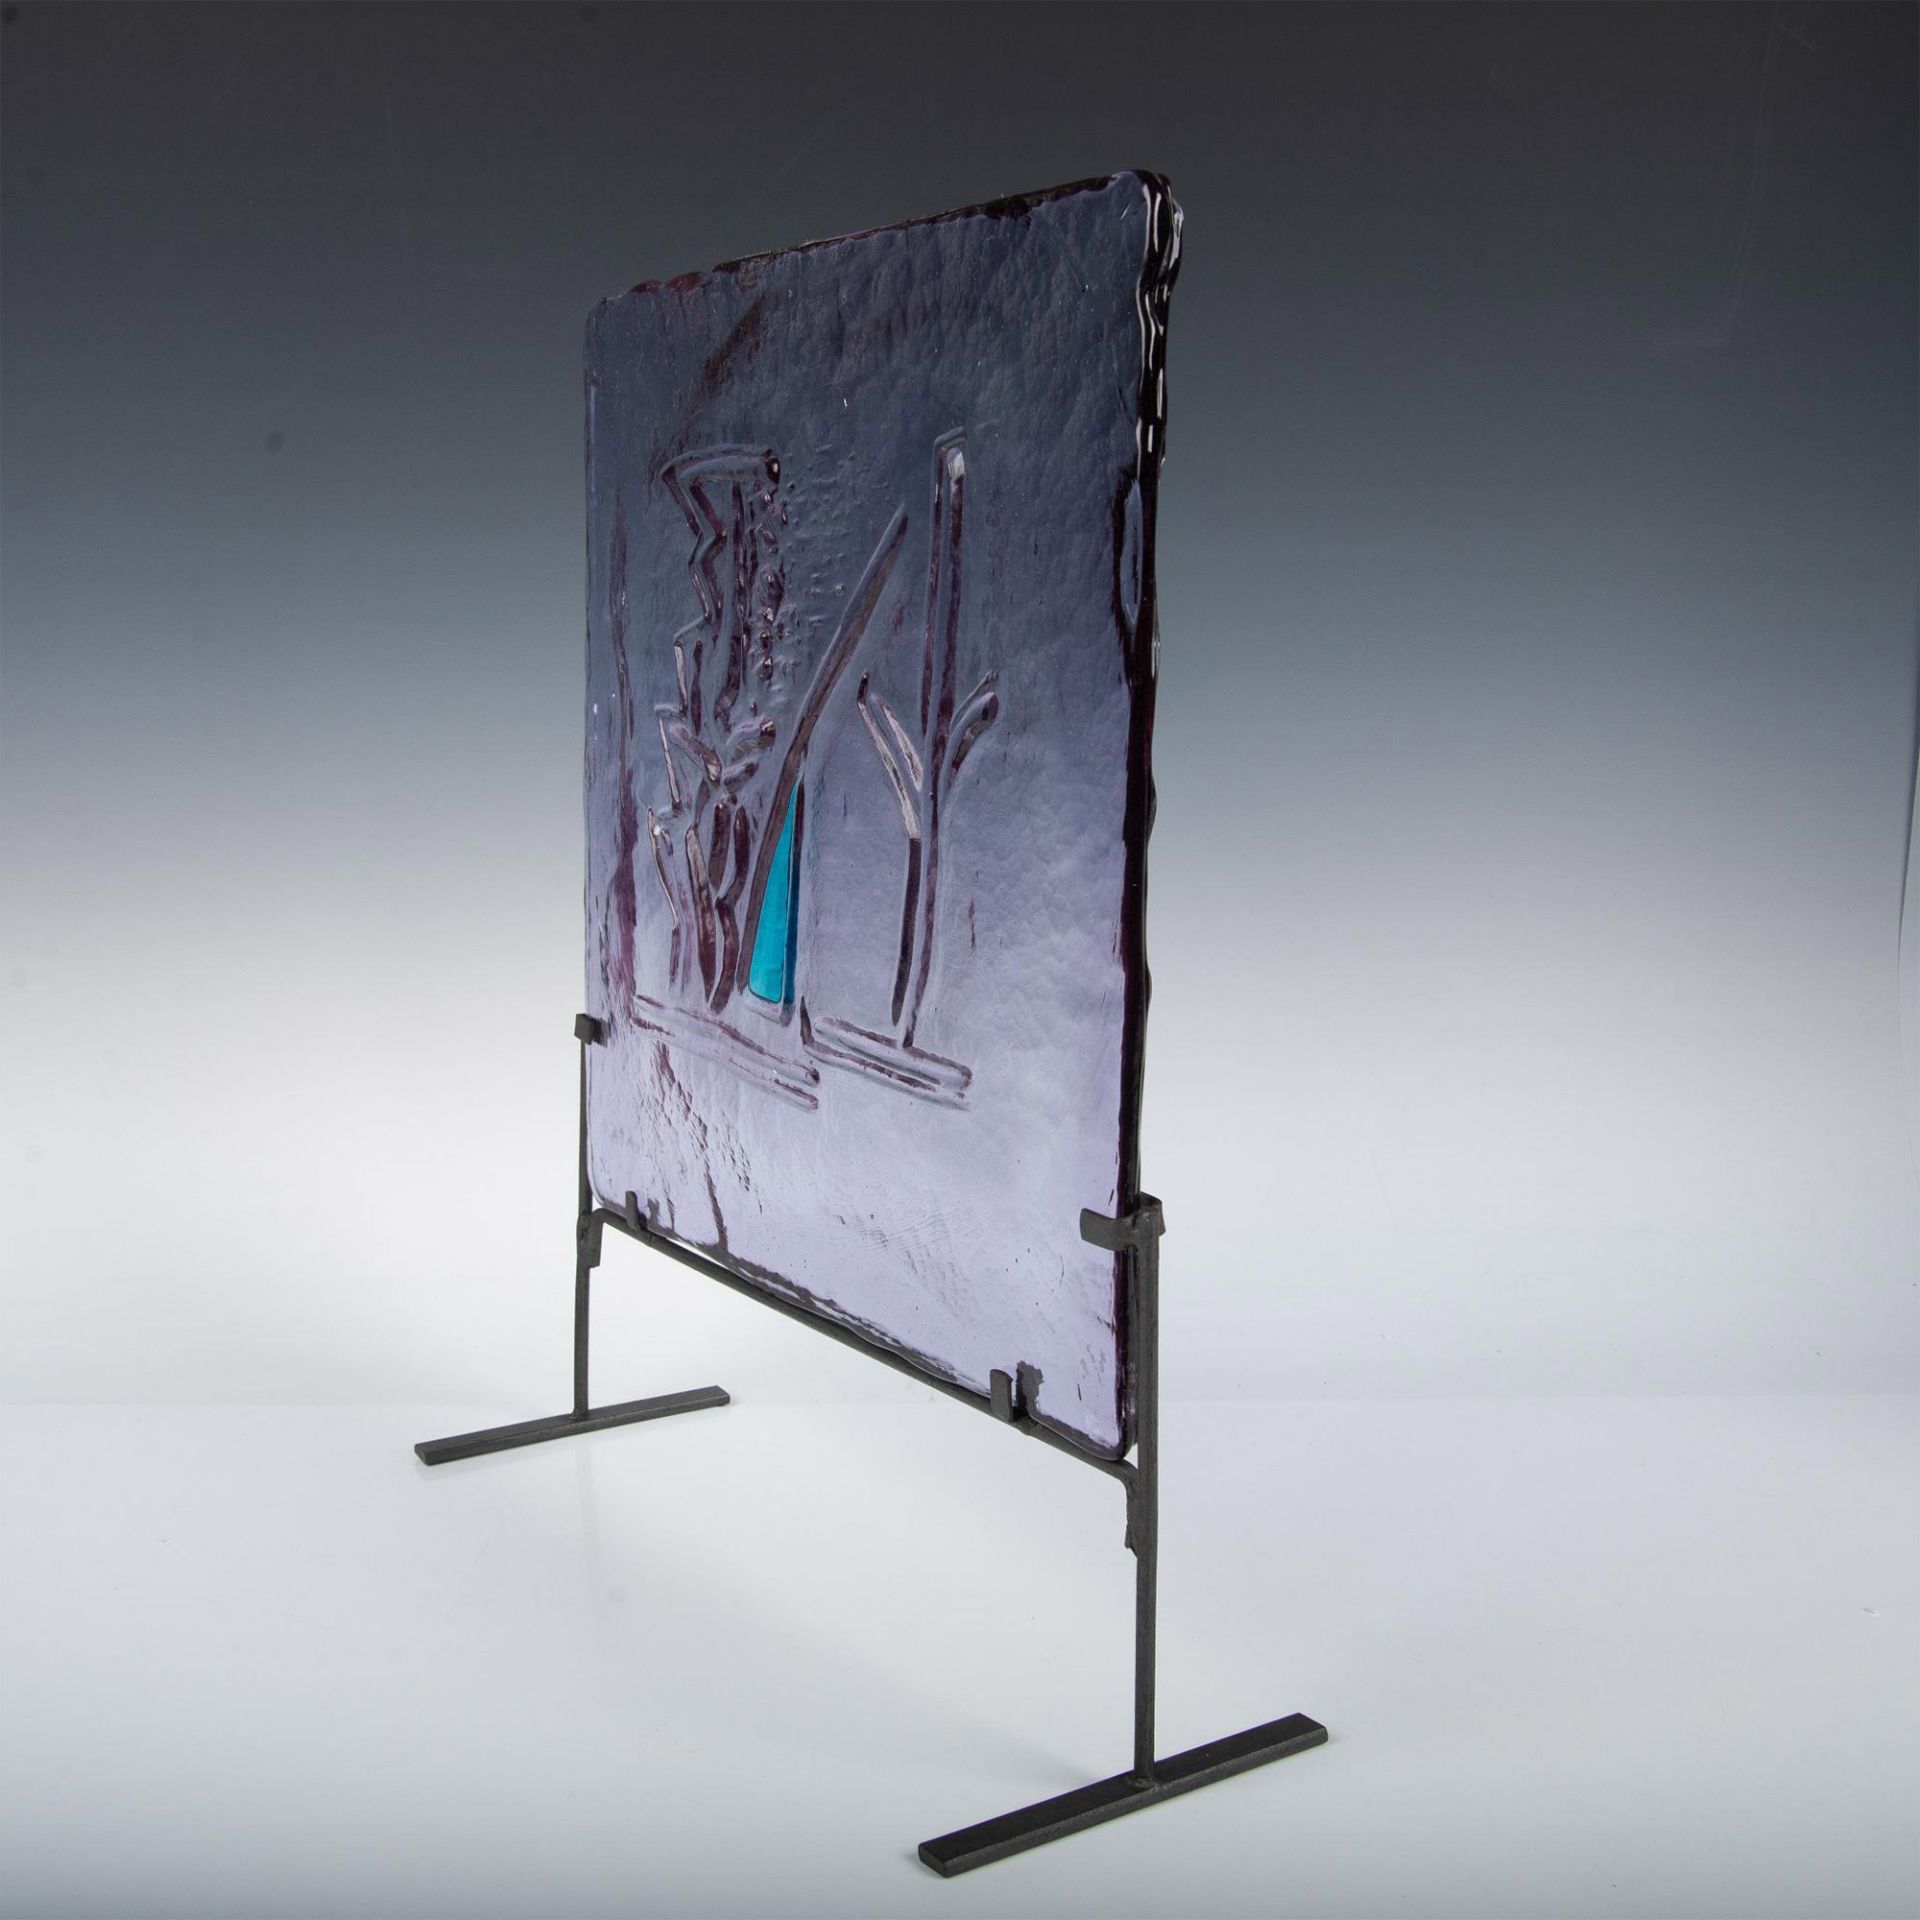 Murano Riccardo Licata Glass Tile Sculpture with Stand - Image 5 of 8